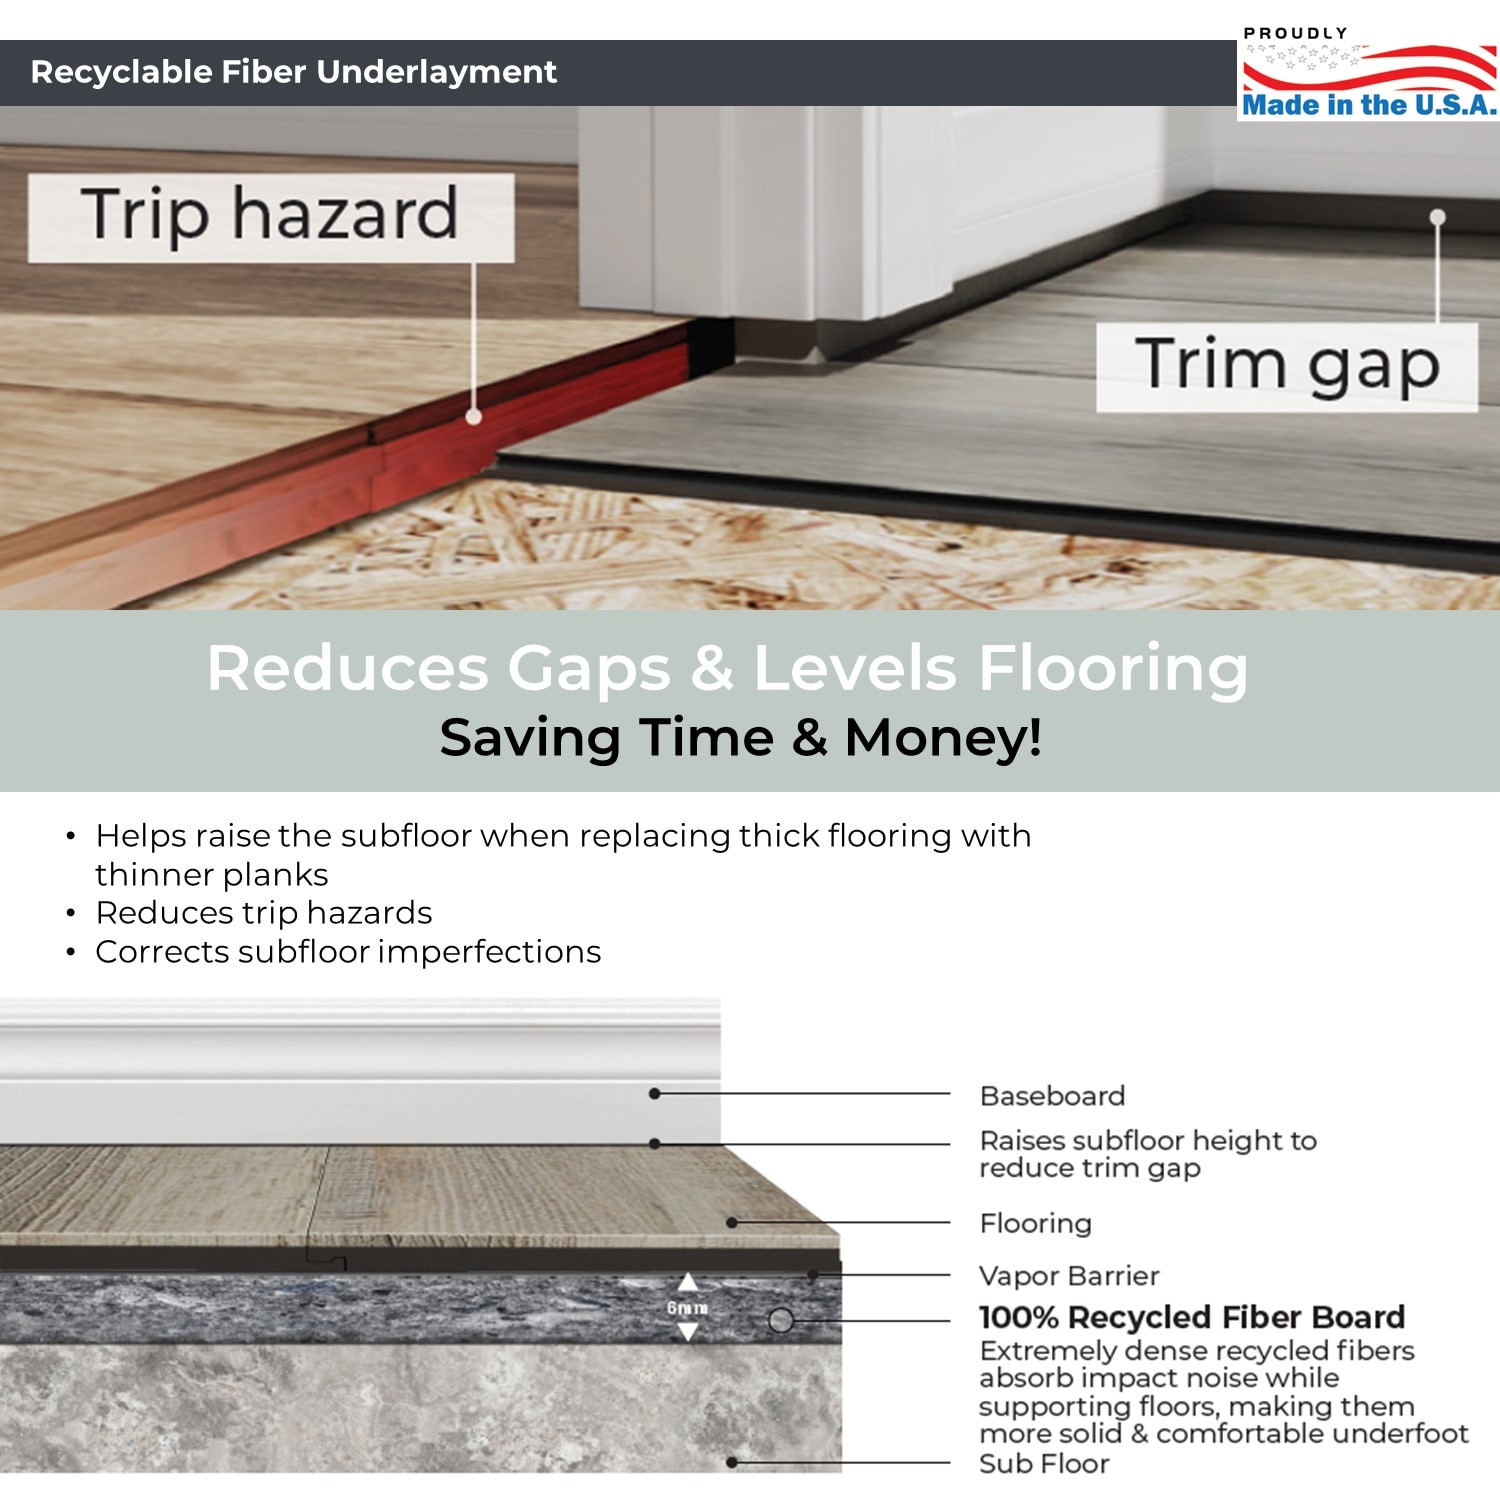 QuietWalk Laminate Flooring Underlayment with Attached Vapor Barrier Offering Superior Sound Reduction, Compression Resistant and Moisture Protection